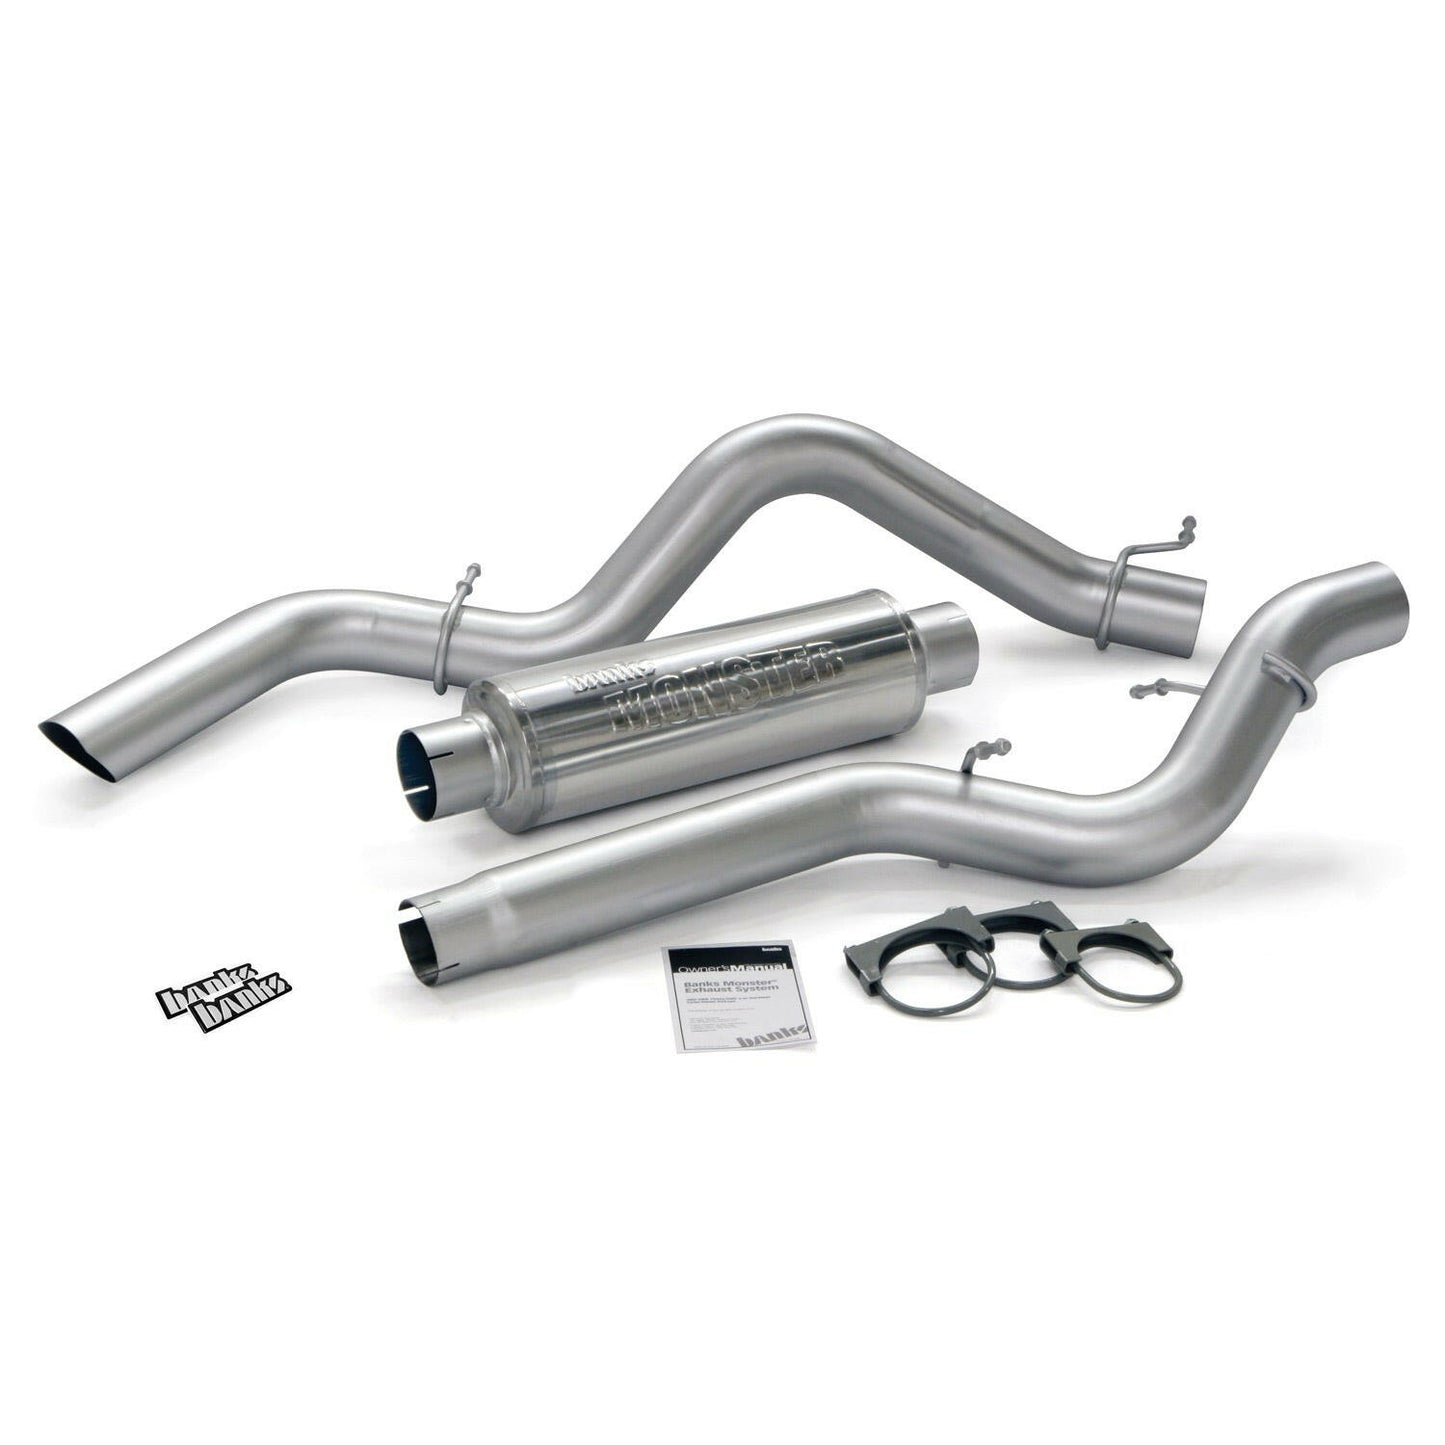 Banks Power Monster Sport Exhaust System 06-07 Chevy 6.6L LBZ CCSB Banks Power.